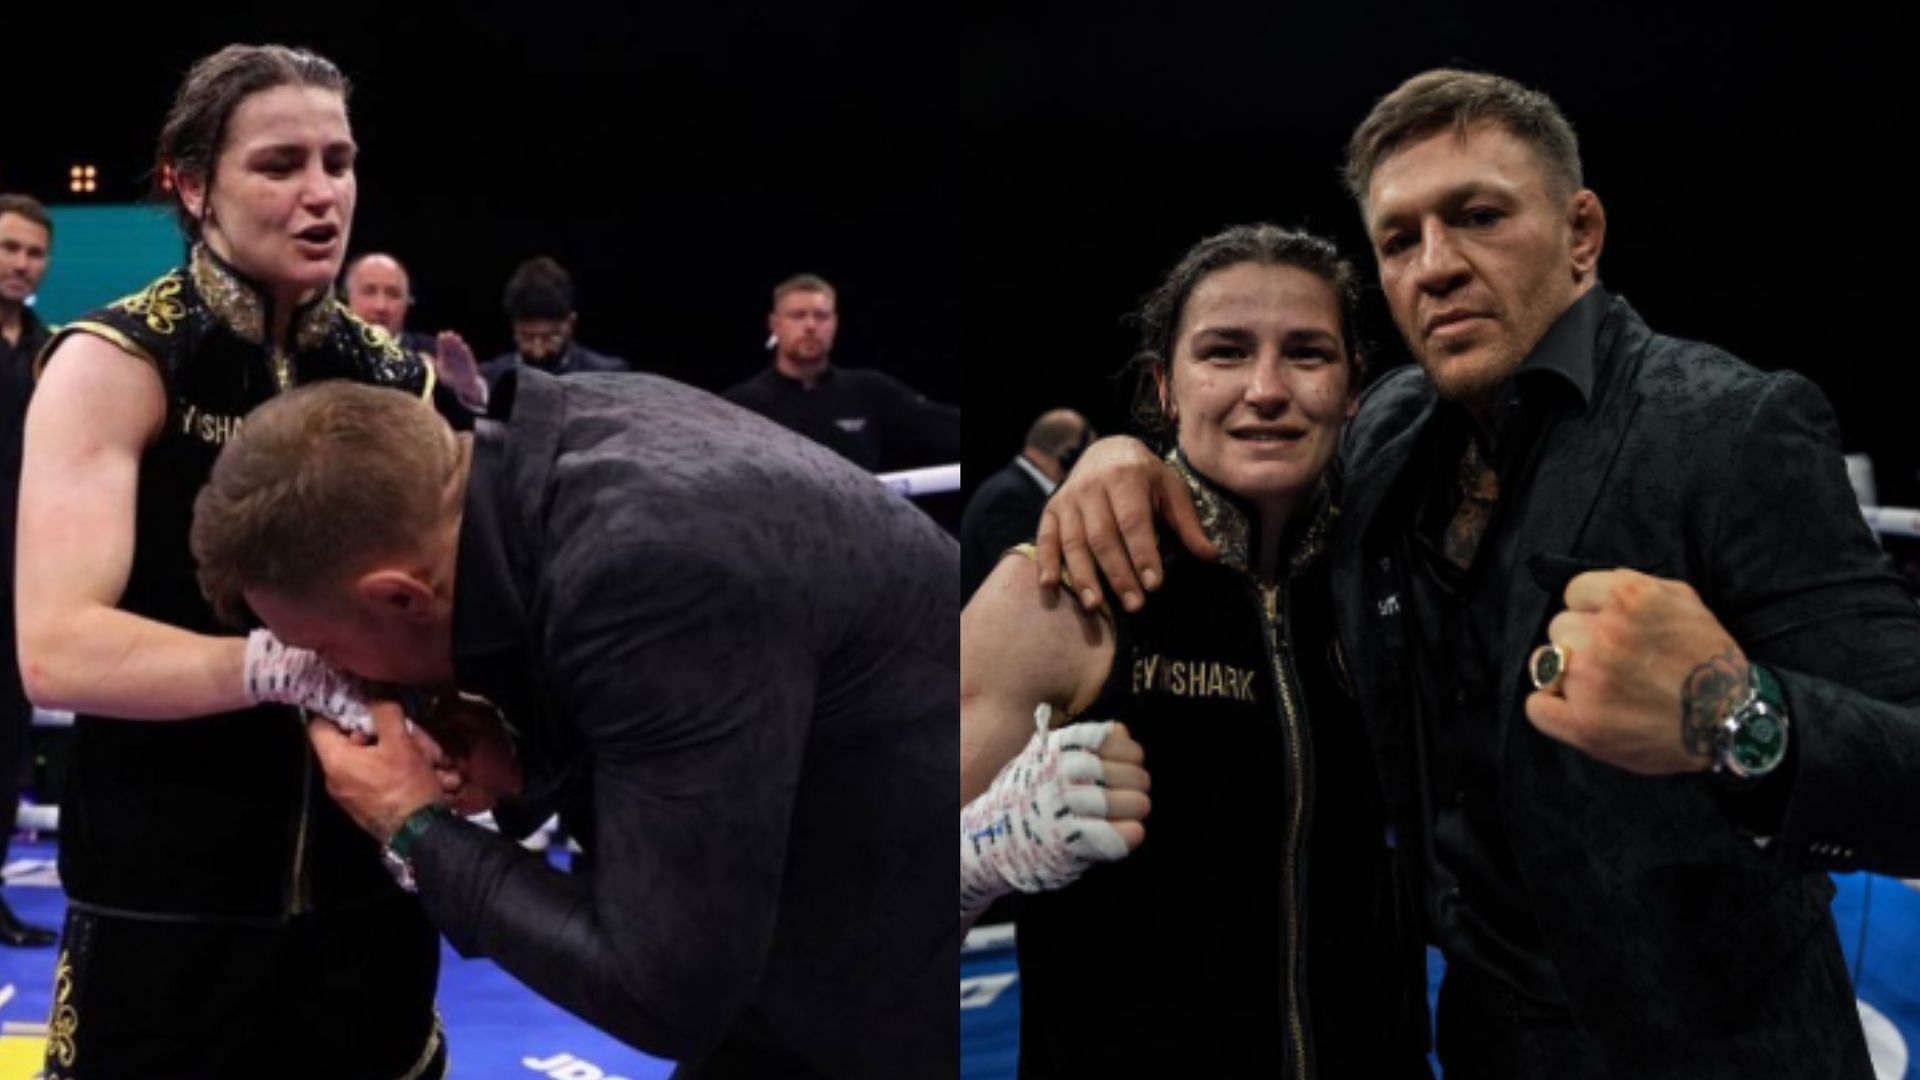 Conor McGregor &amp; Katie Taylor [Images courtesy of @thenotoriousmma on Instagram]